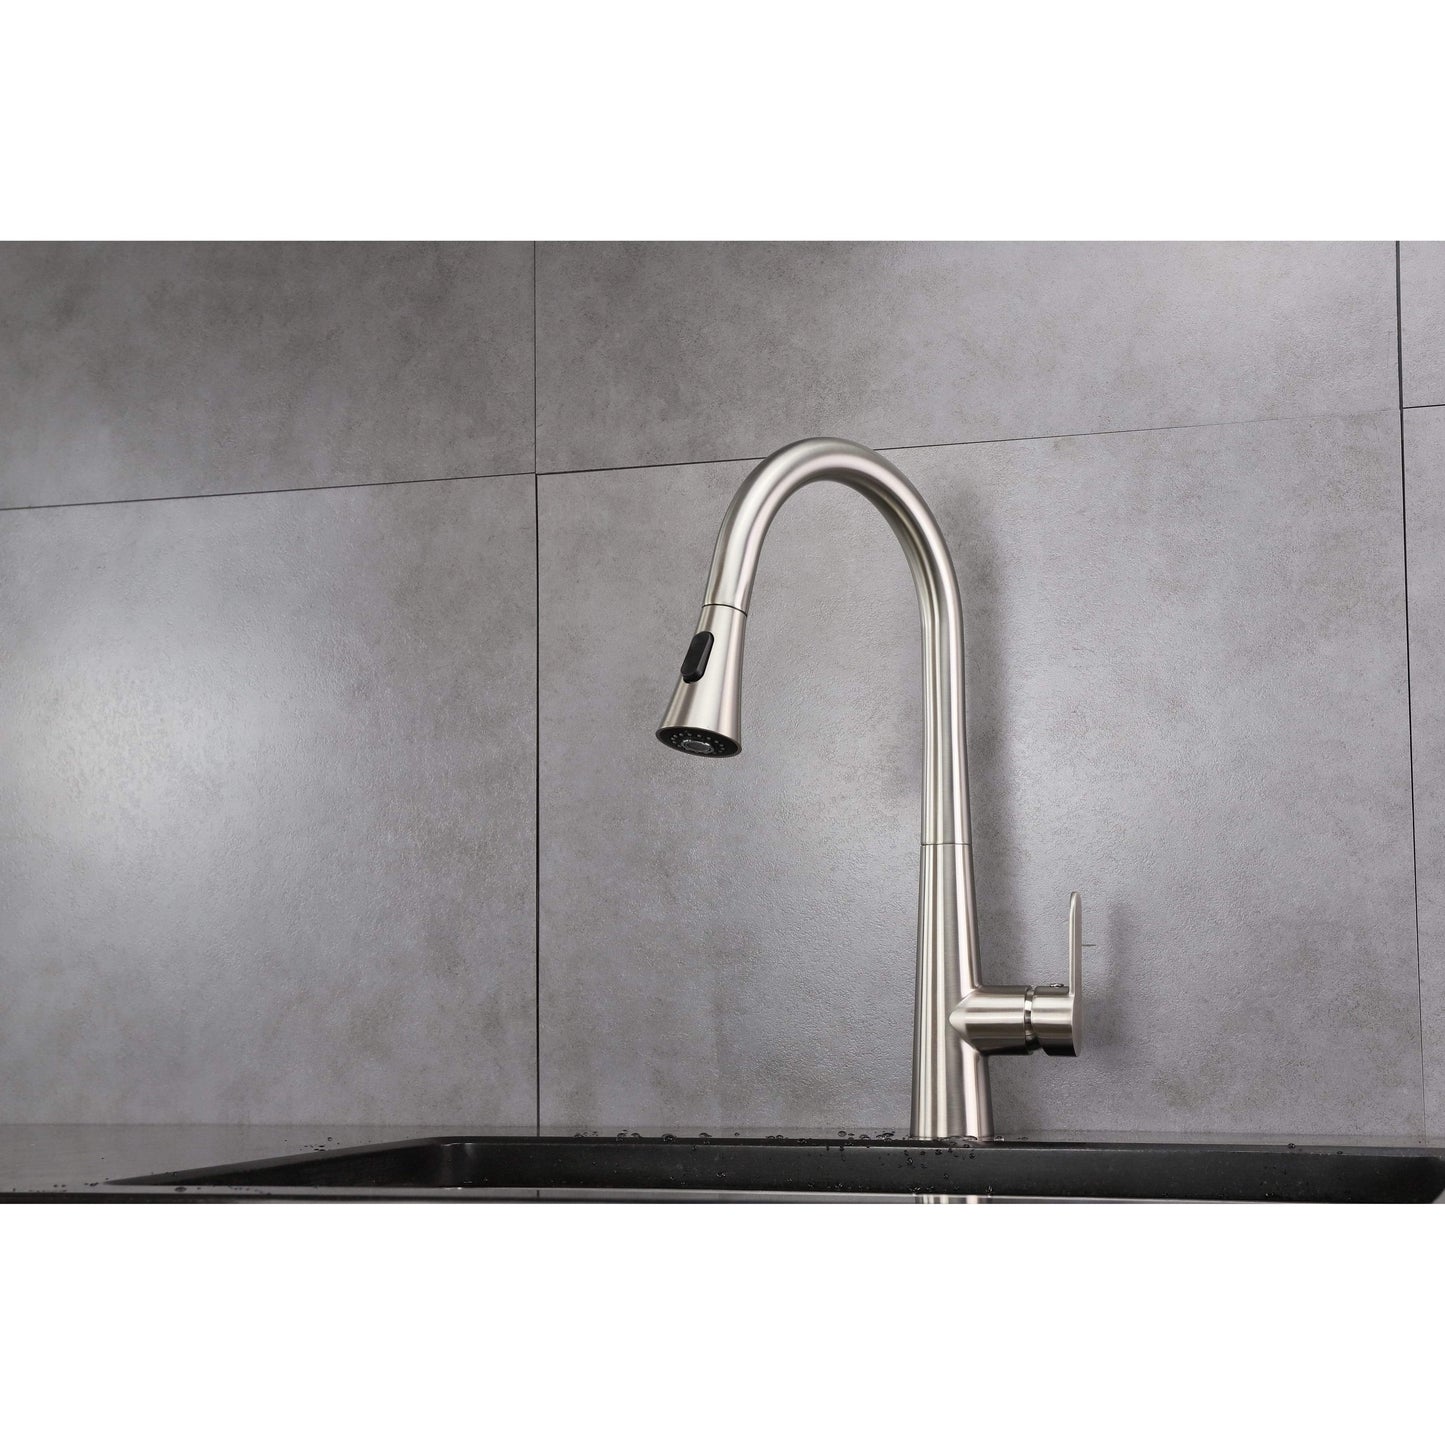 Lexora Faucet Brushed Nickel Finish Furio Brass Kitchen Faucet w/ Pull Out Sprayer